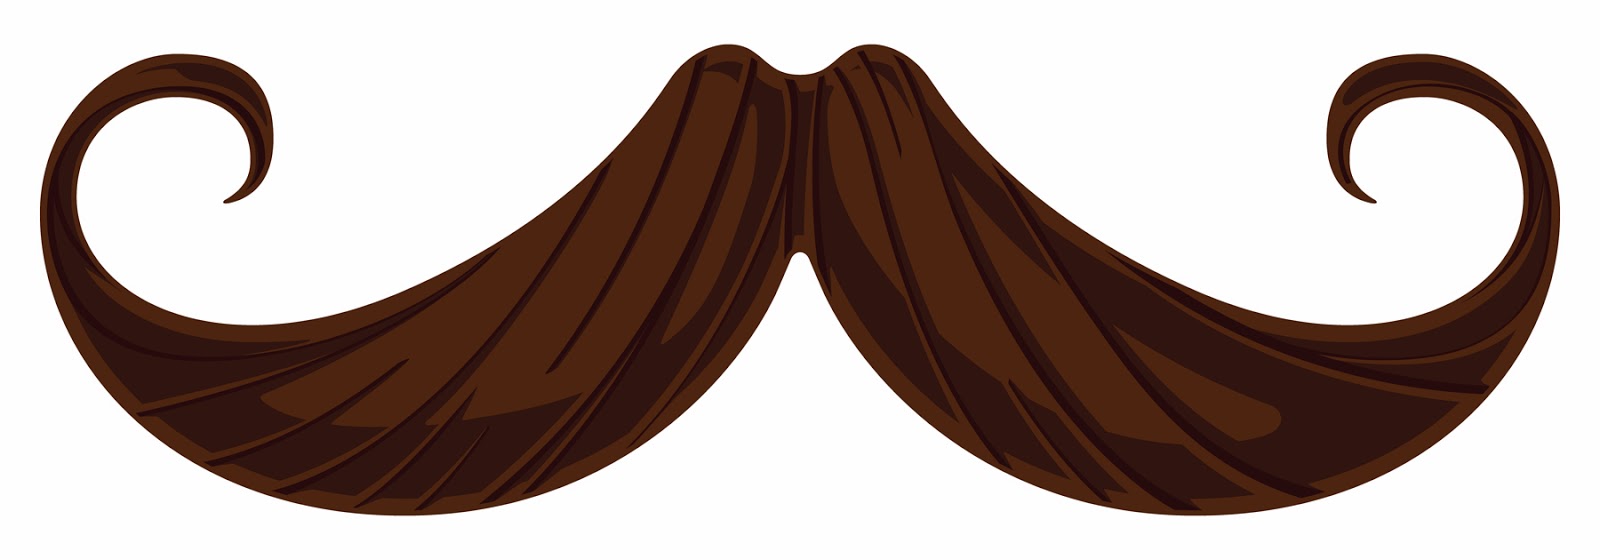 Mustache Transparent Background Images & Pictures - Becuo